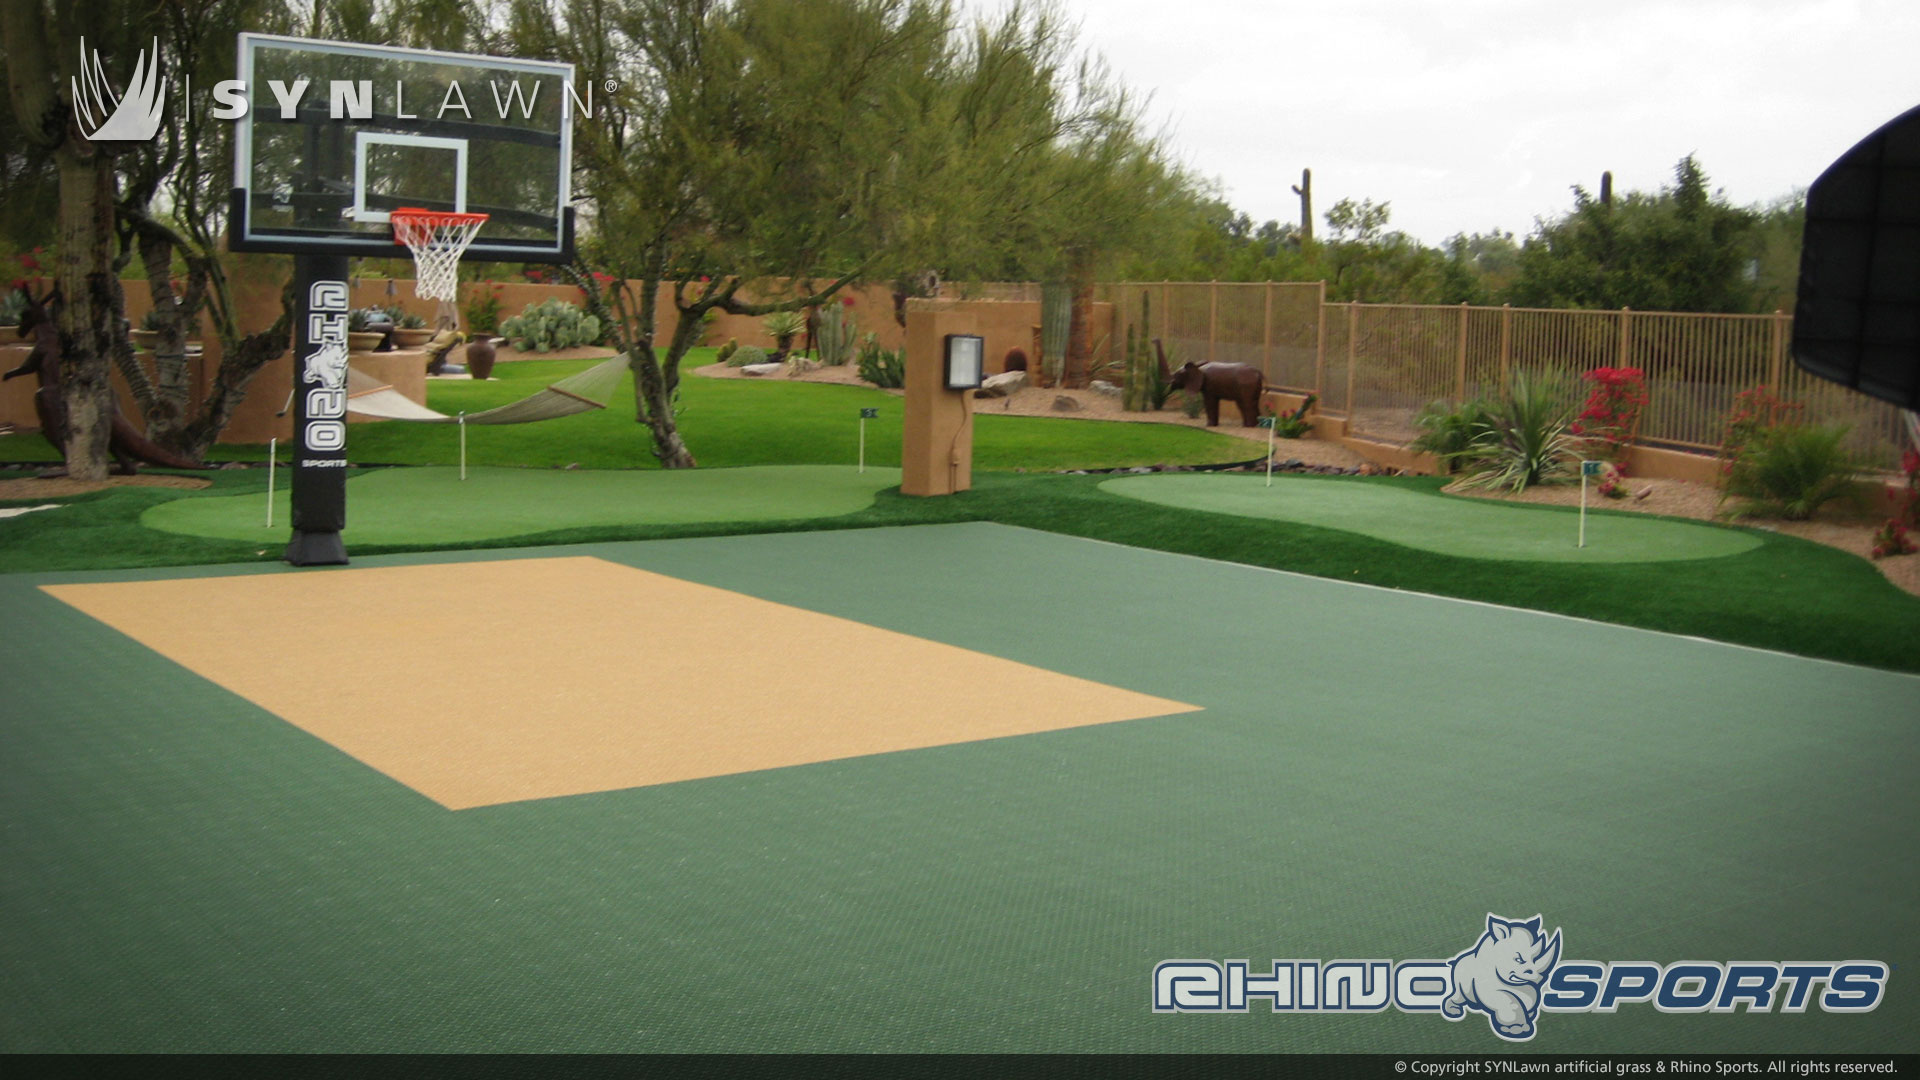 image of a backyard Rhino Sports basketball court with artificial grass putting green